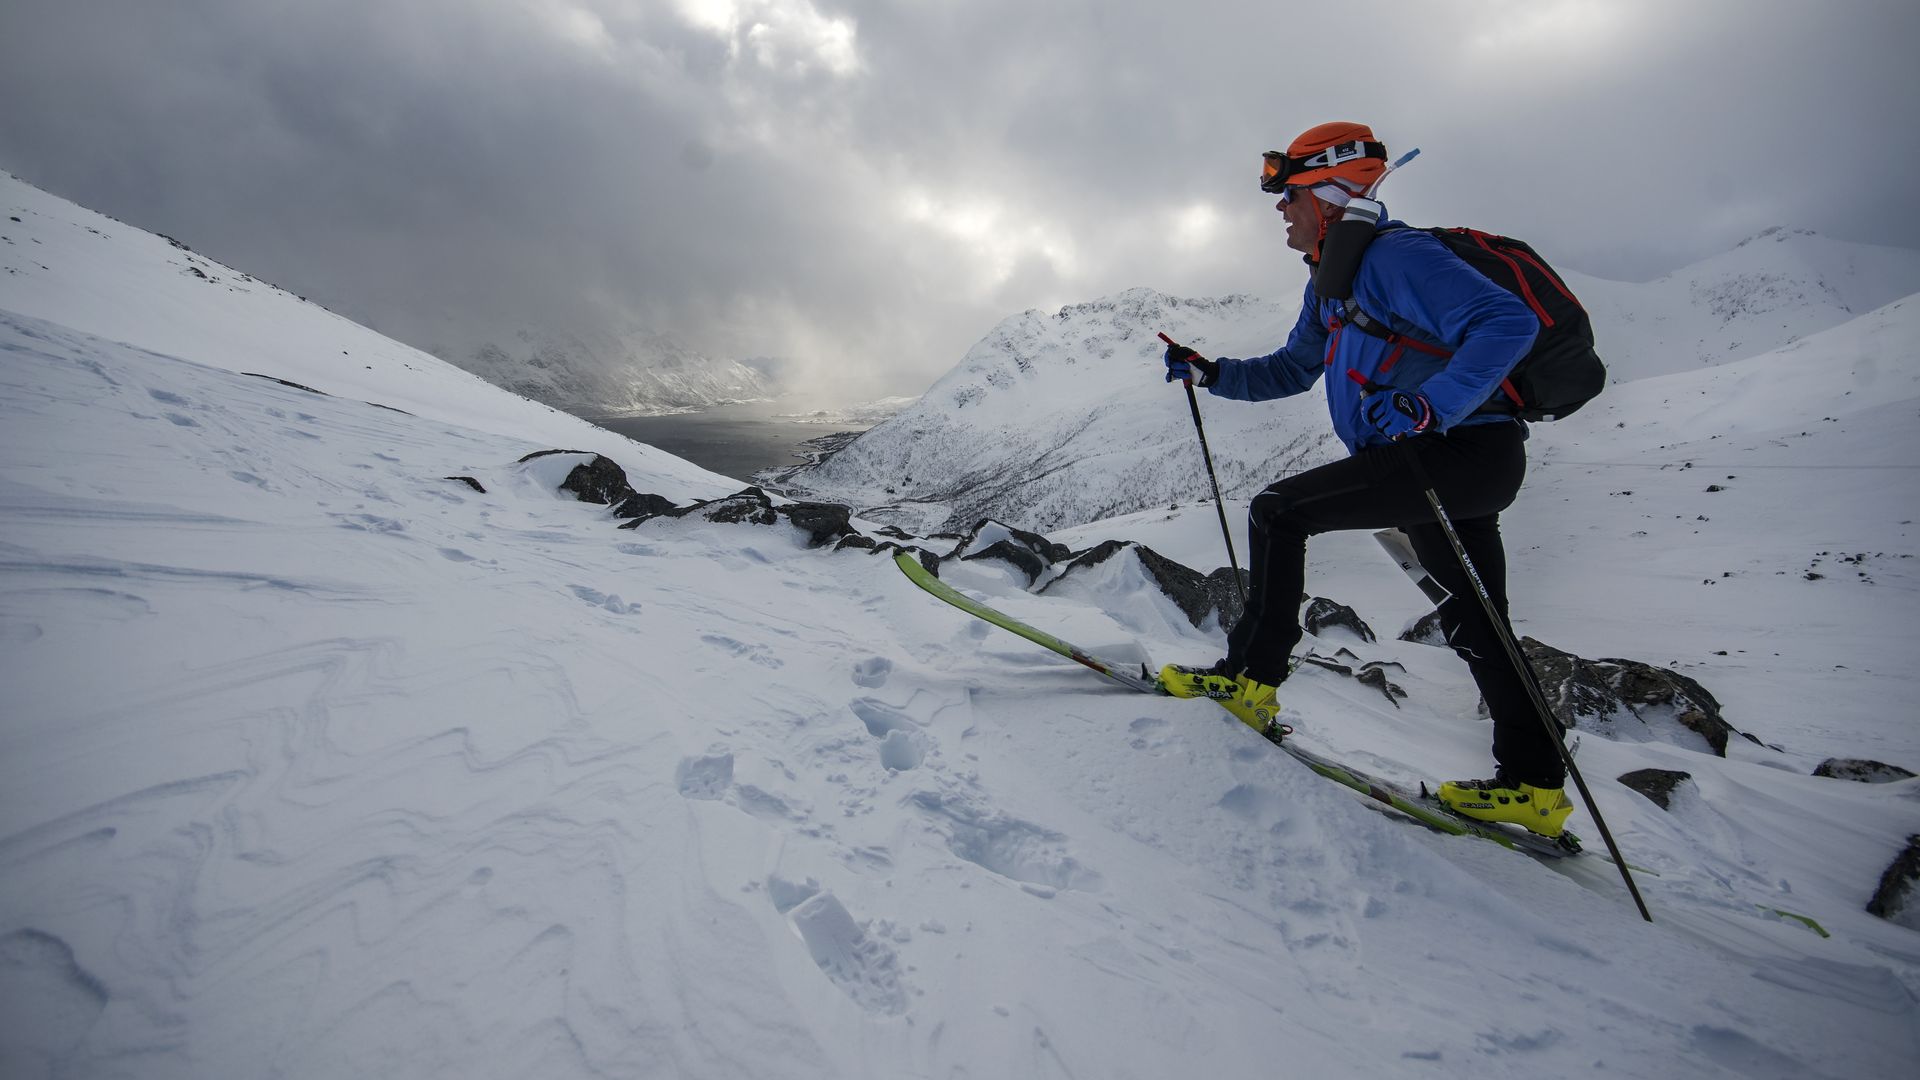 A skier competes in a skimo race in Norway. Photo: Kai-Otto Melau/Getty Images